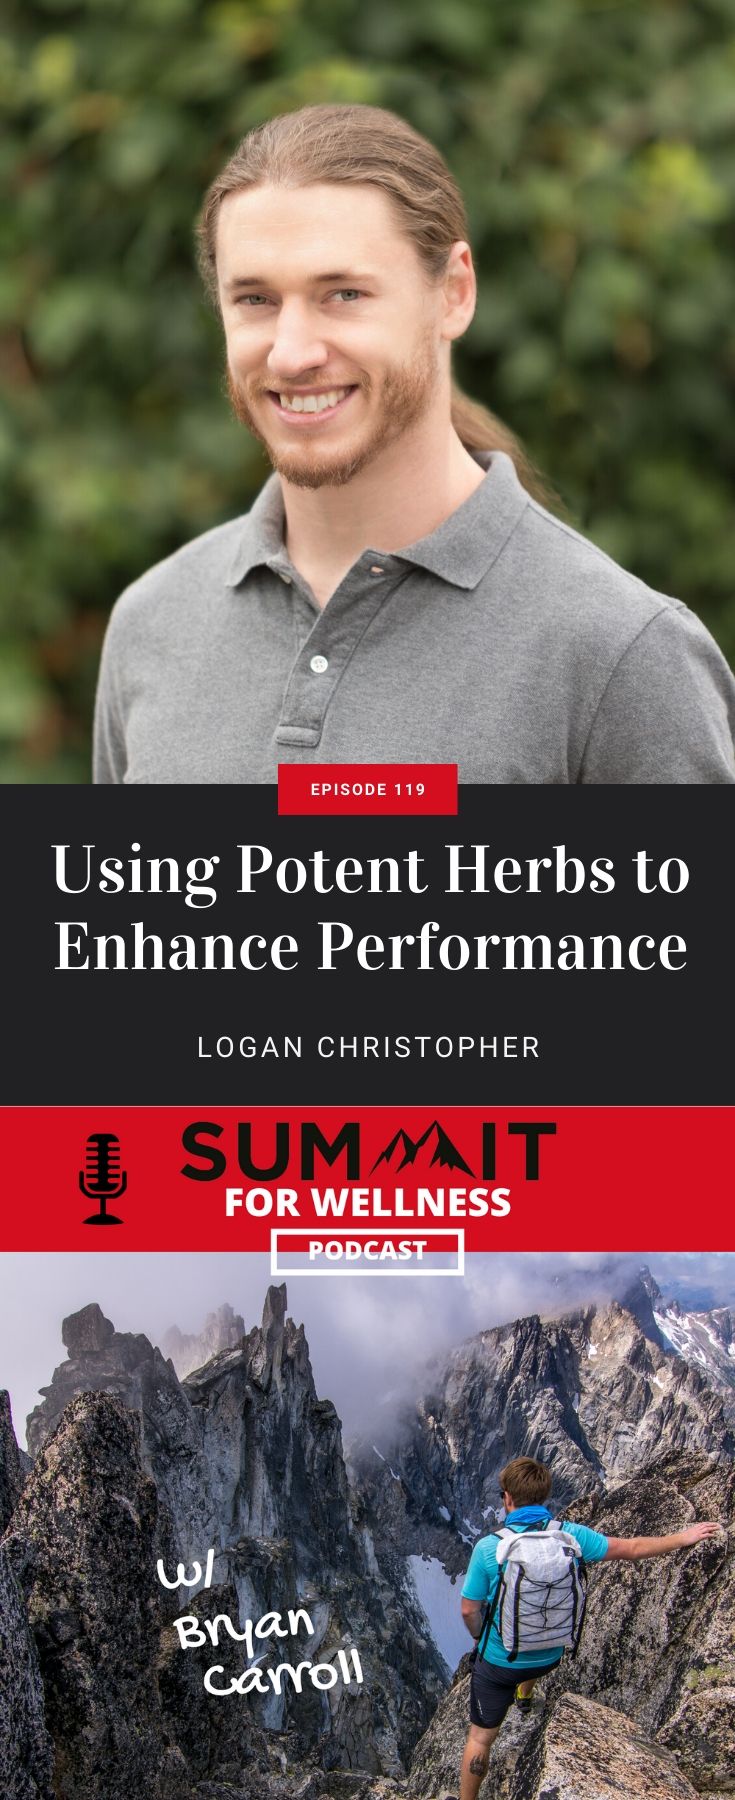 Logan Christopher of Lost Empire Herbs teaches how potent herbs can enhance performance